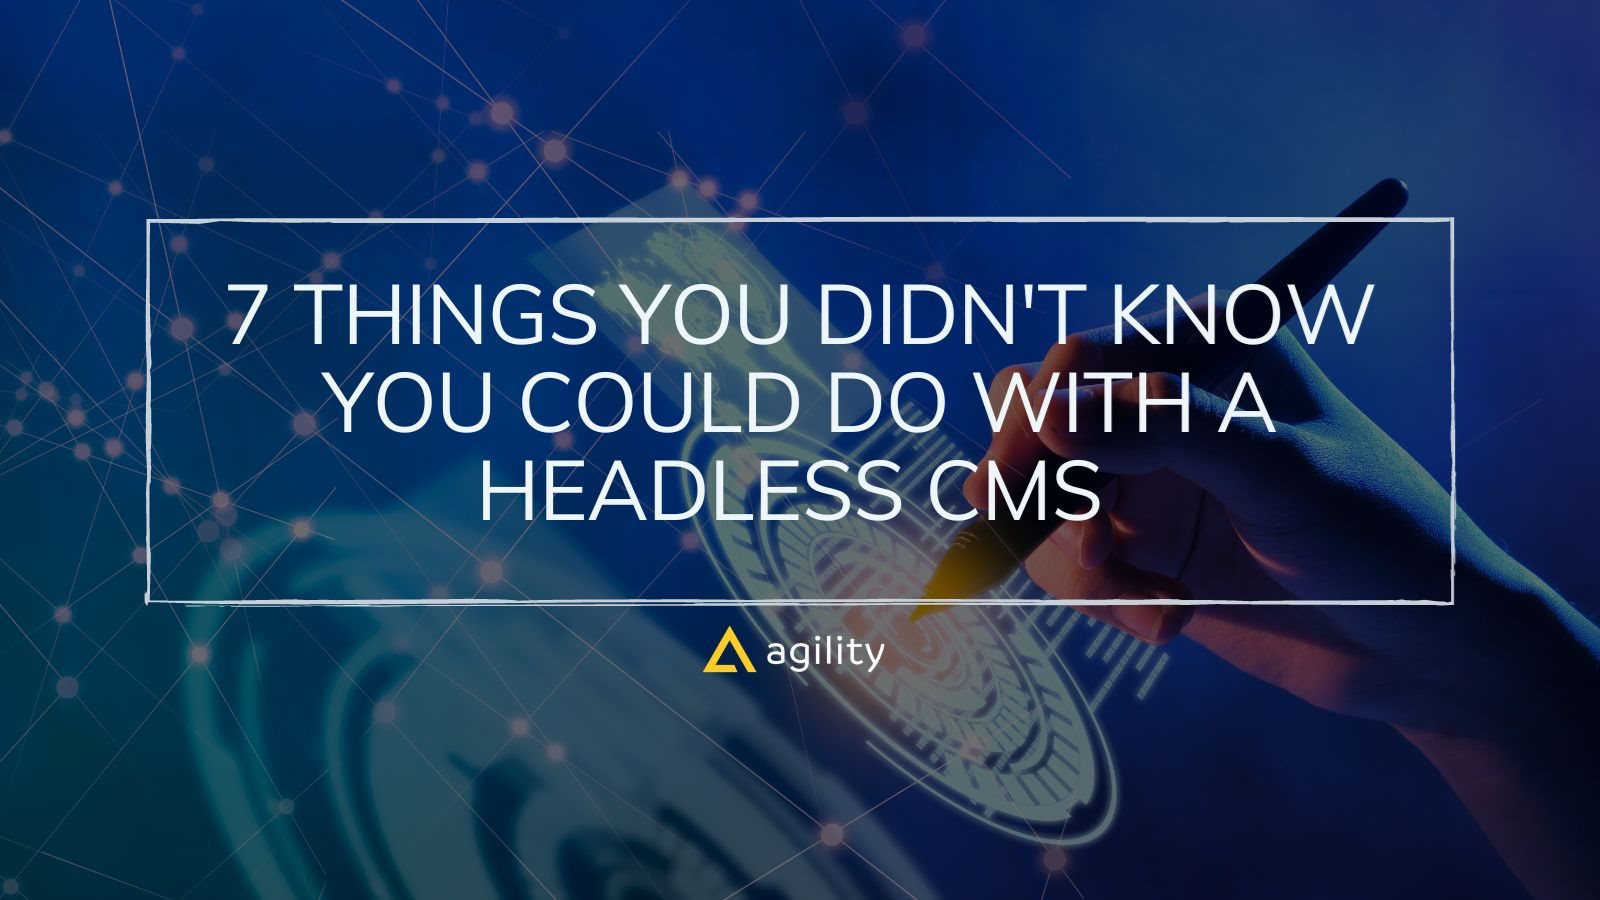 7 Things You Didn't Know You Could Do With a Headless CMS